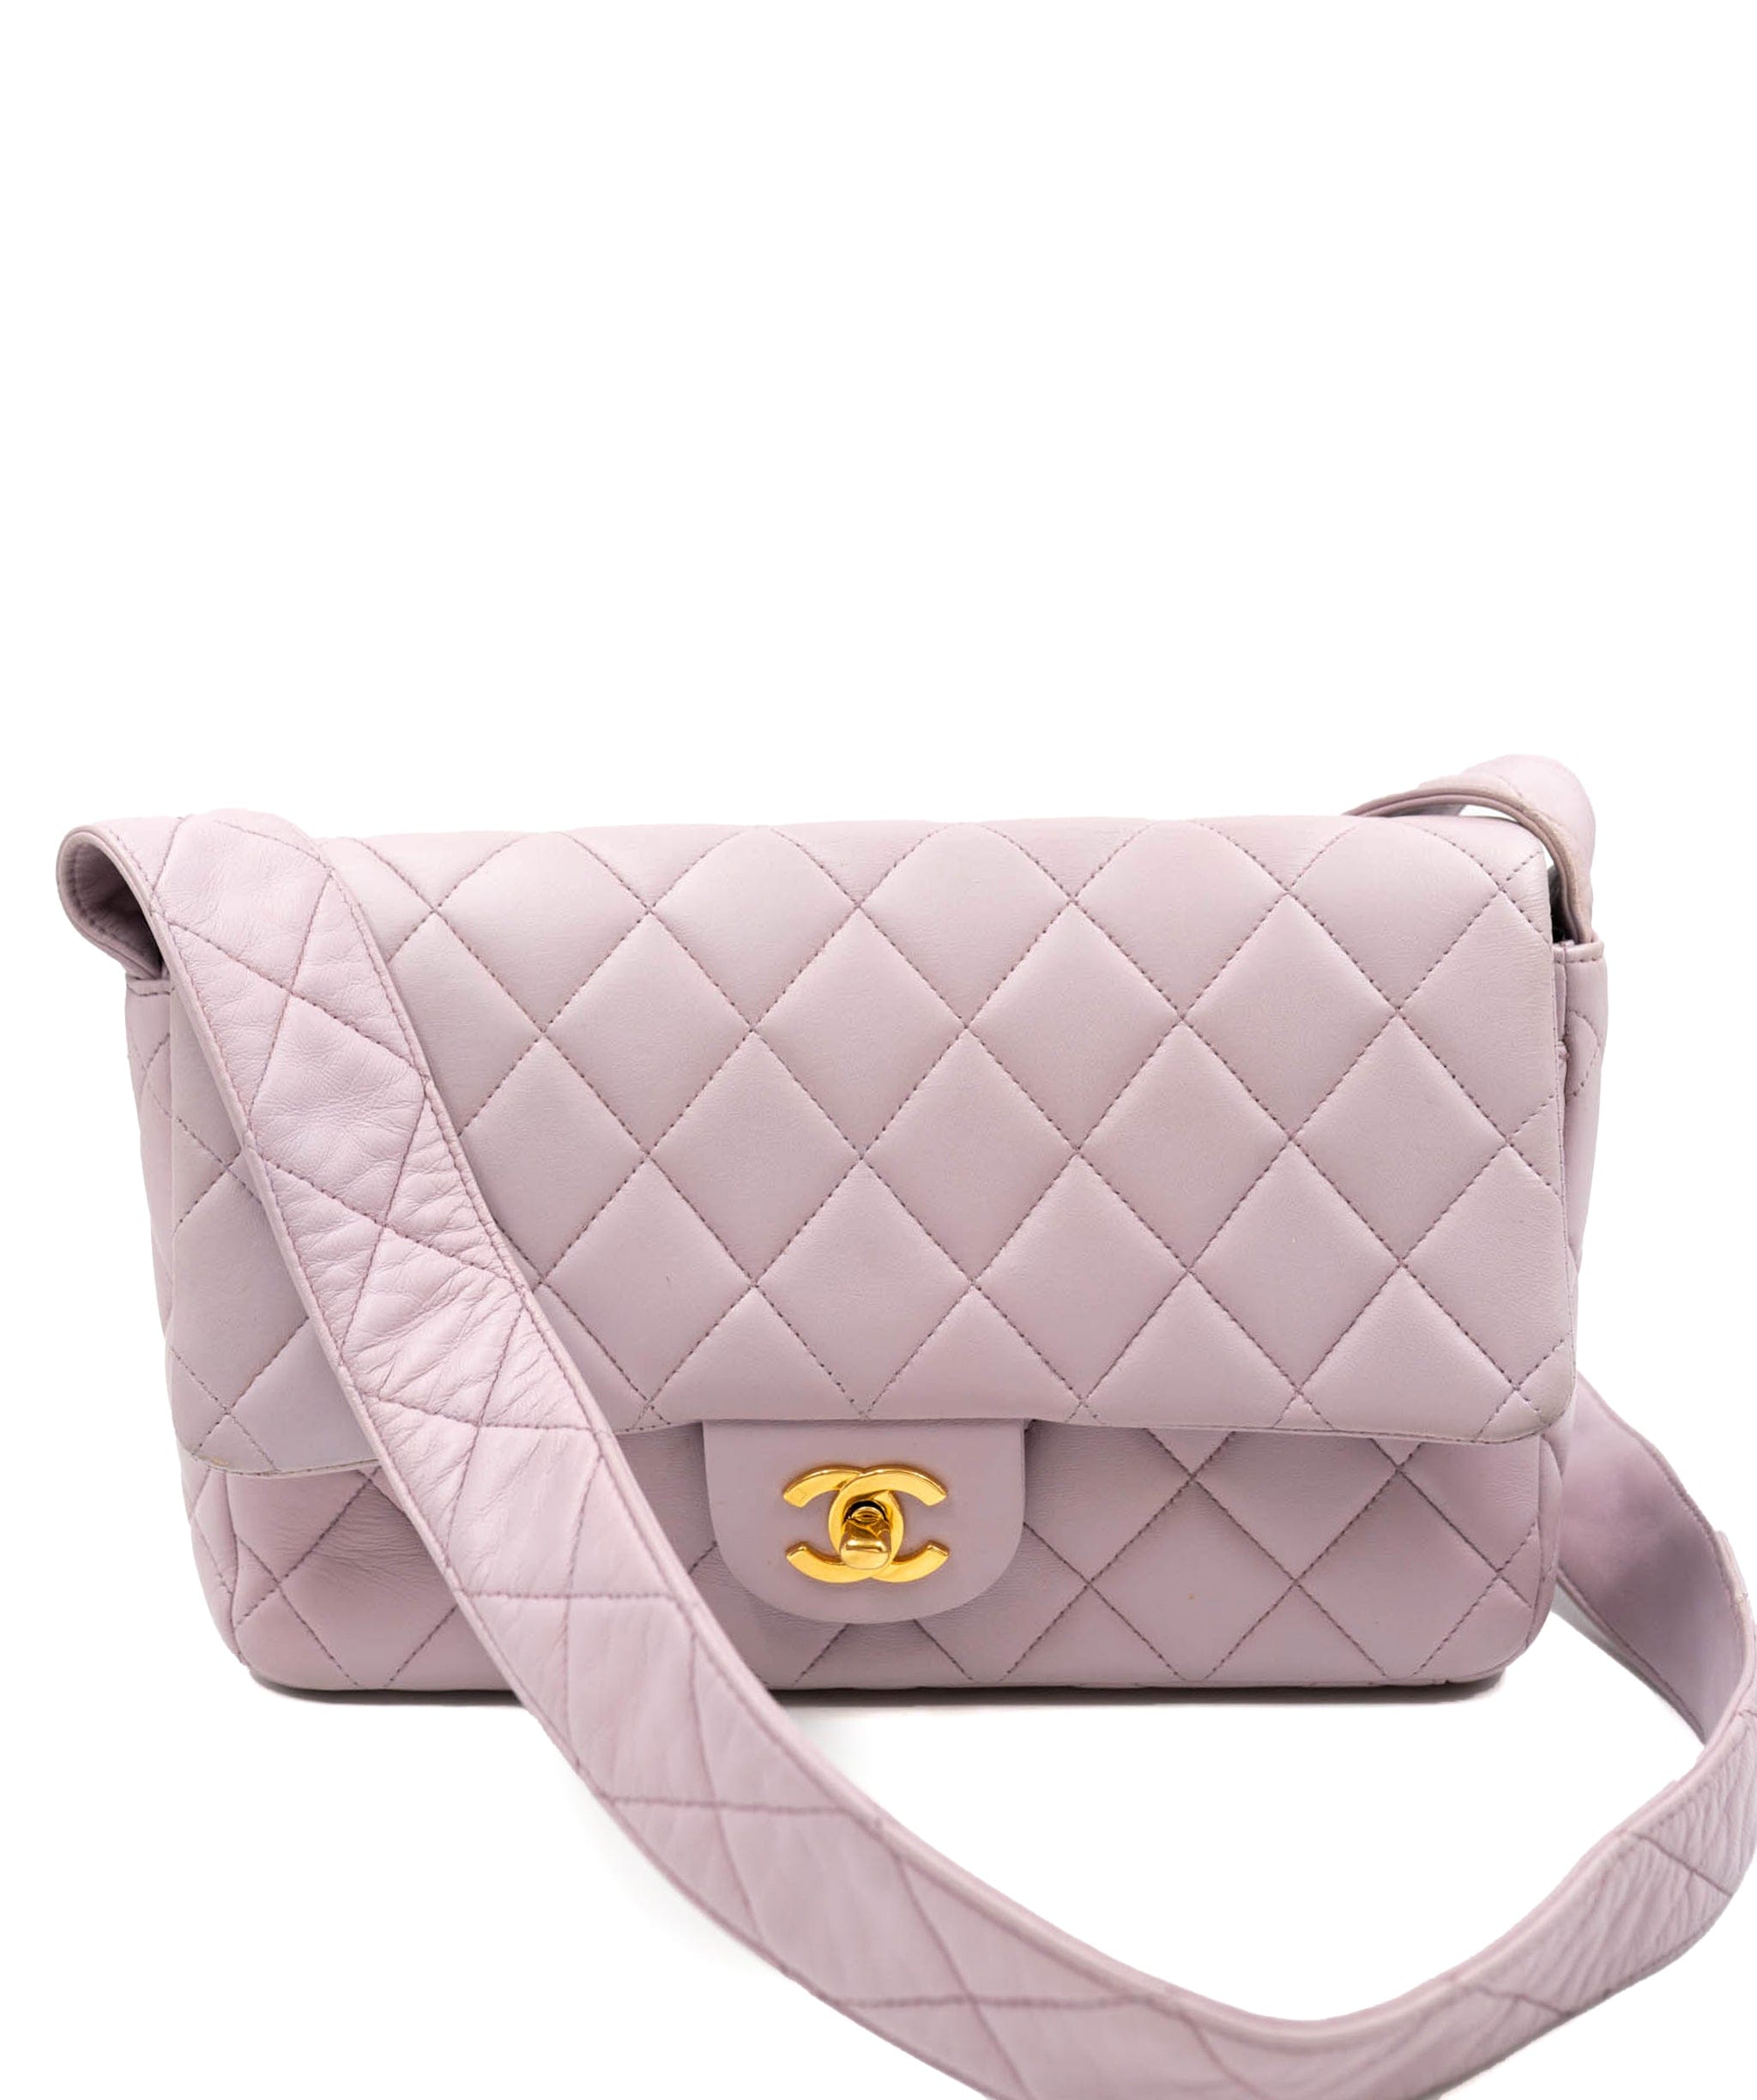 Chanel Chanel Lavender Classic Quilted Flap Bag with Leather Strap ASL2481